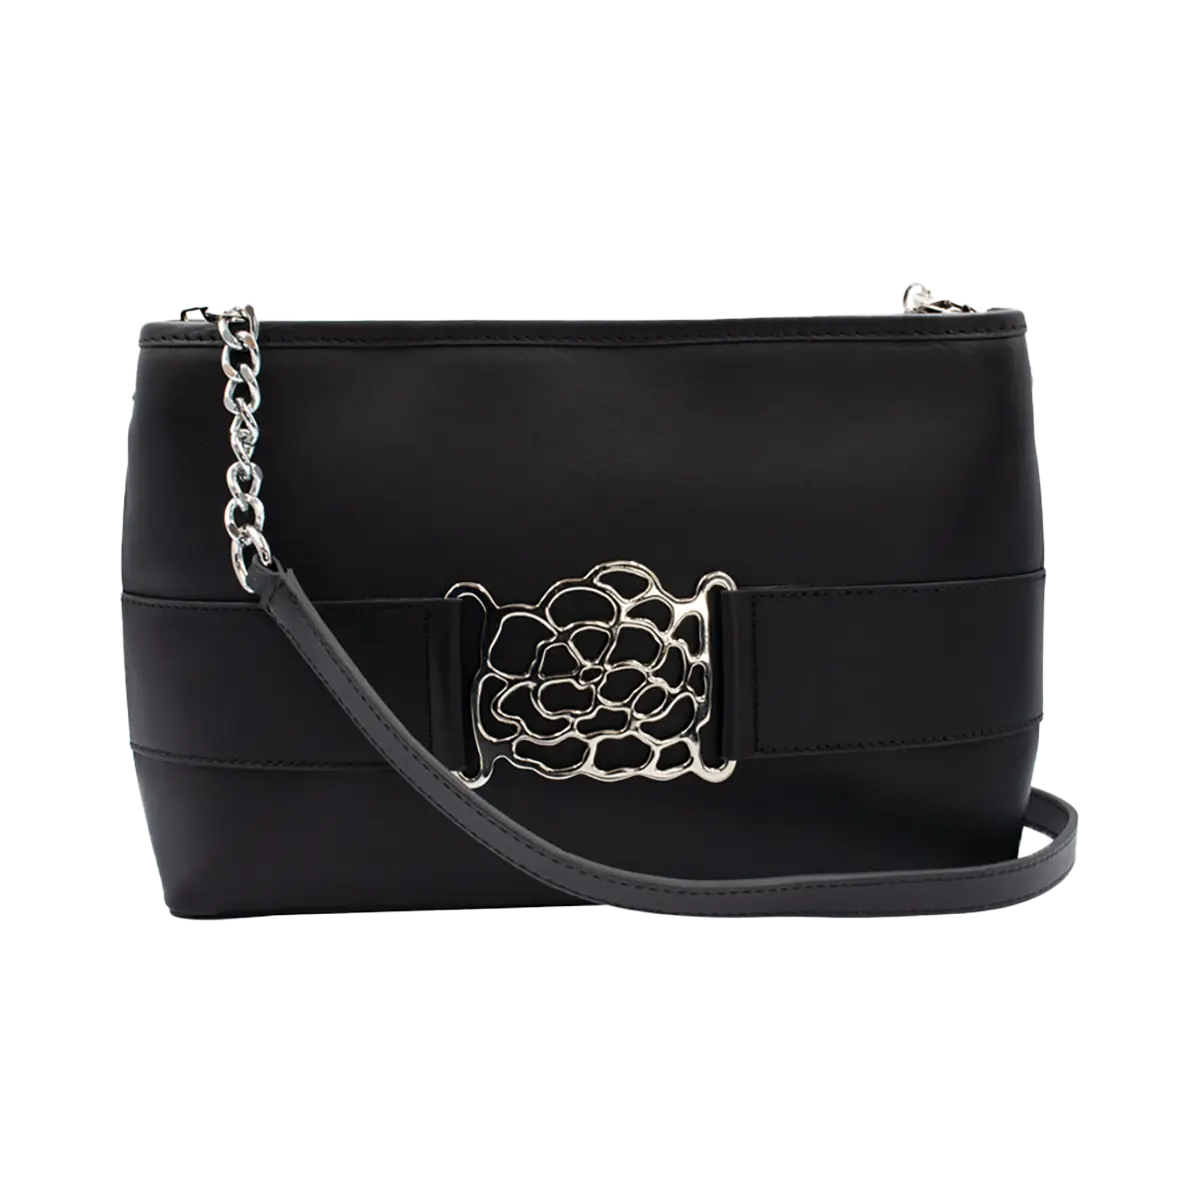 small black leather shoulder bag with metal accent. Fashion accessory for women in San Diego, CA.